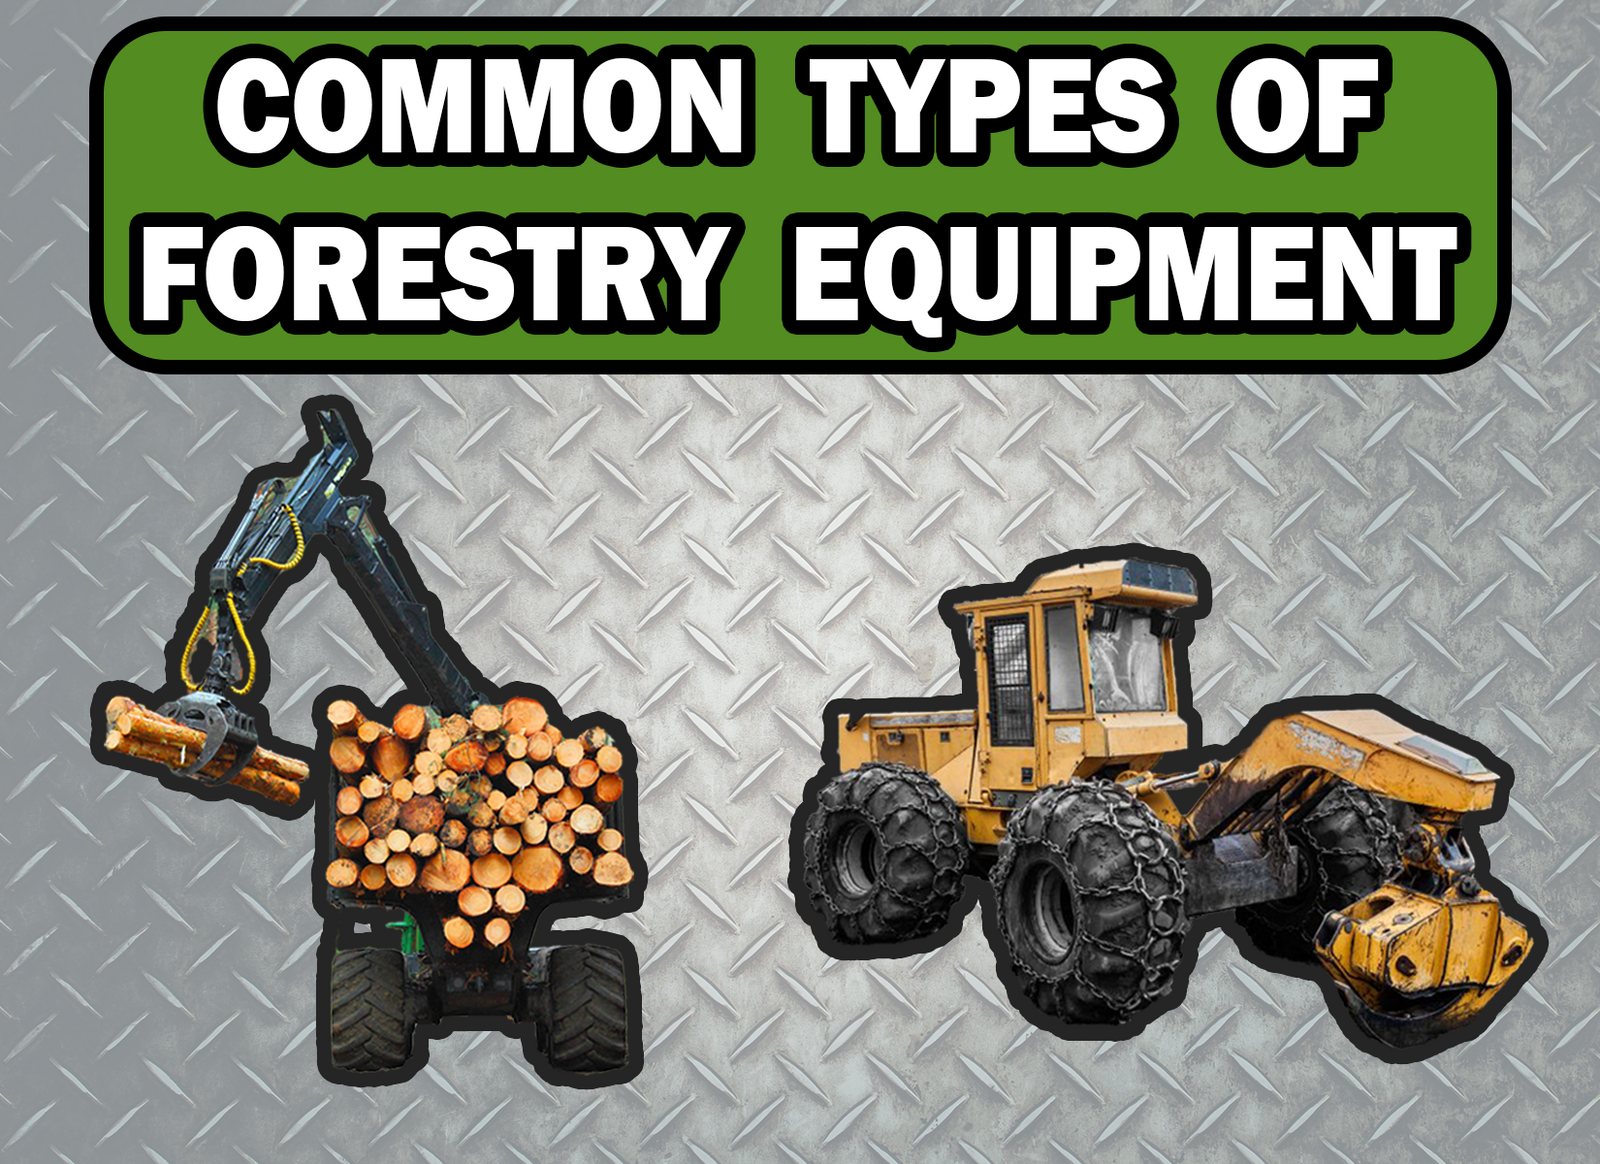 Common Types of Forestry Equipment